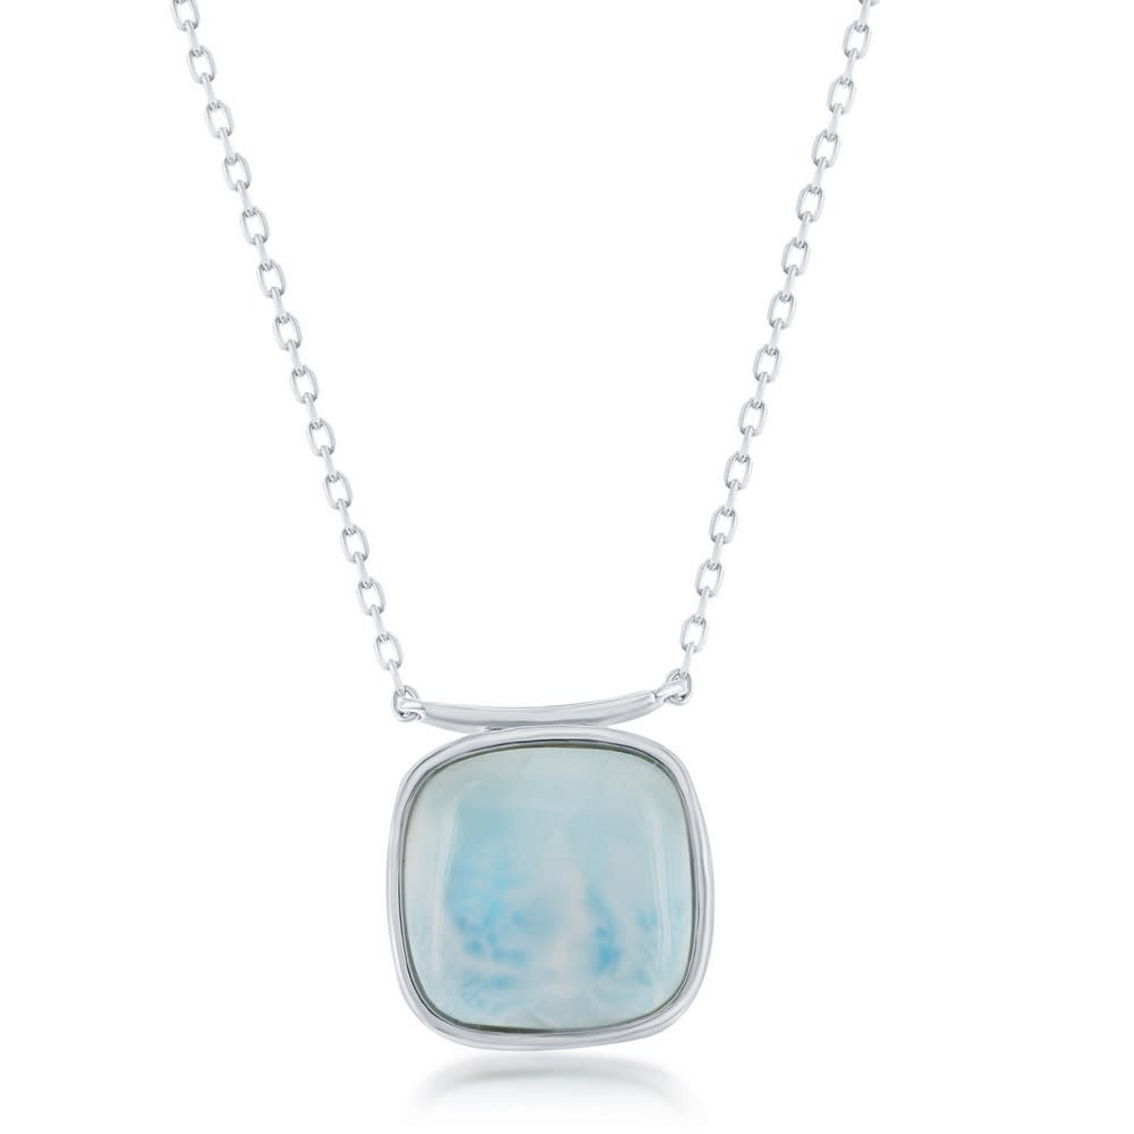 Caribbean Treasures Sterling Silver Square Shape Larimar Necklace - Image 2 of 3